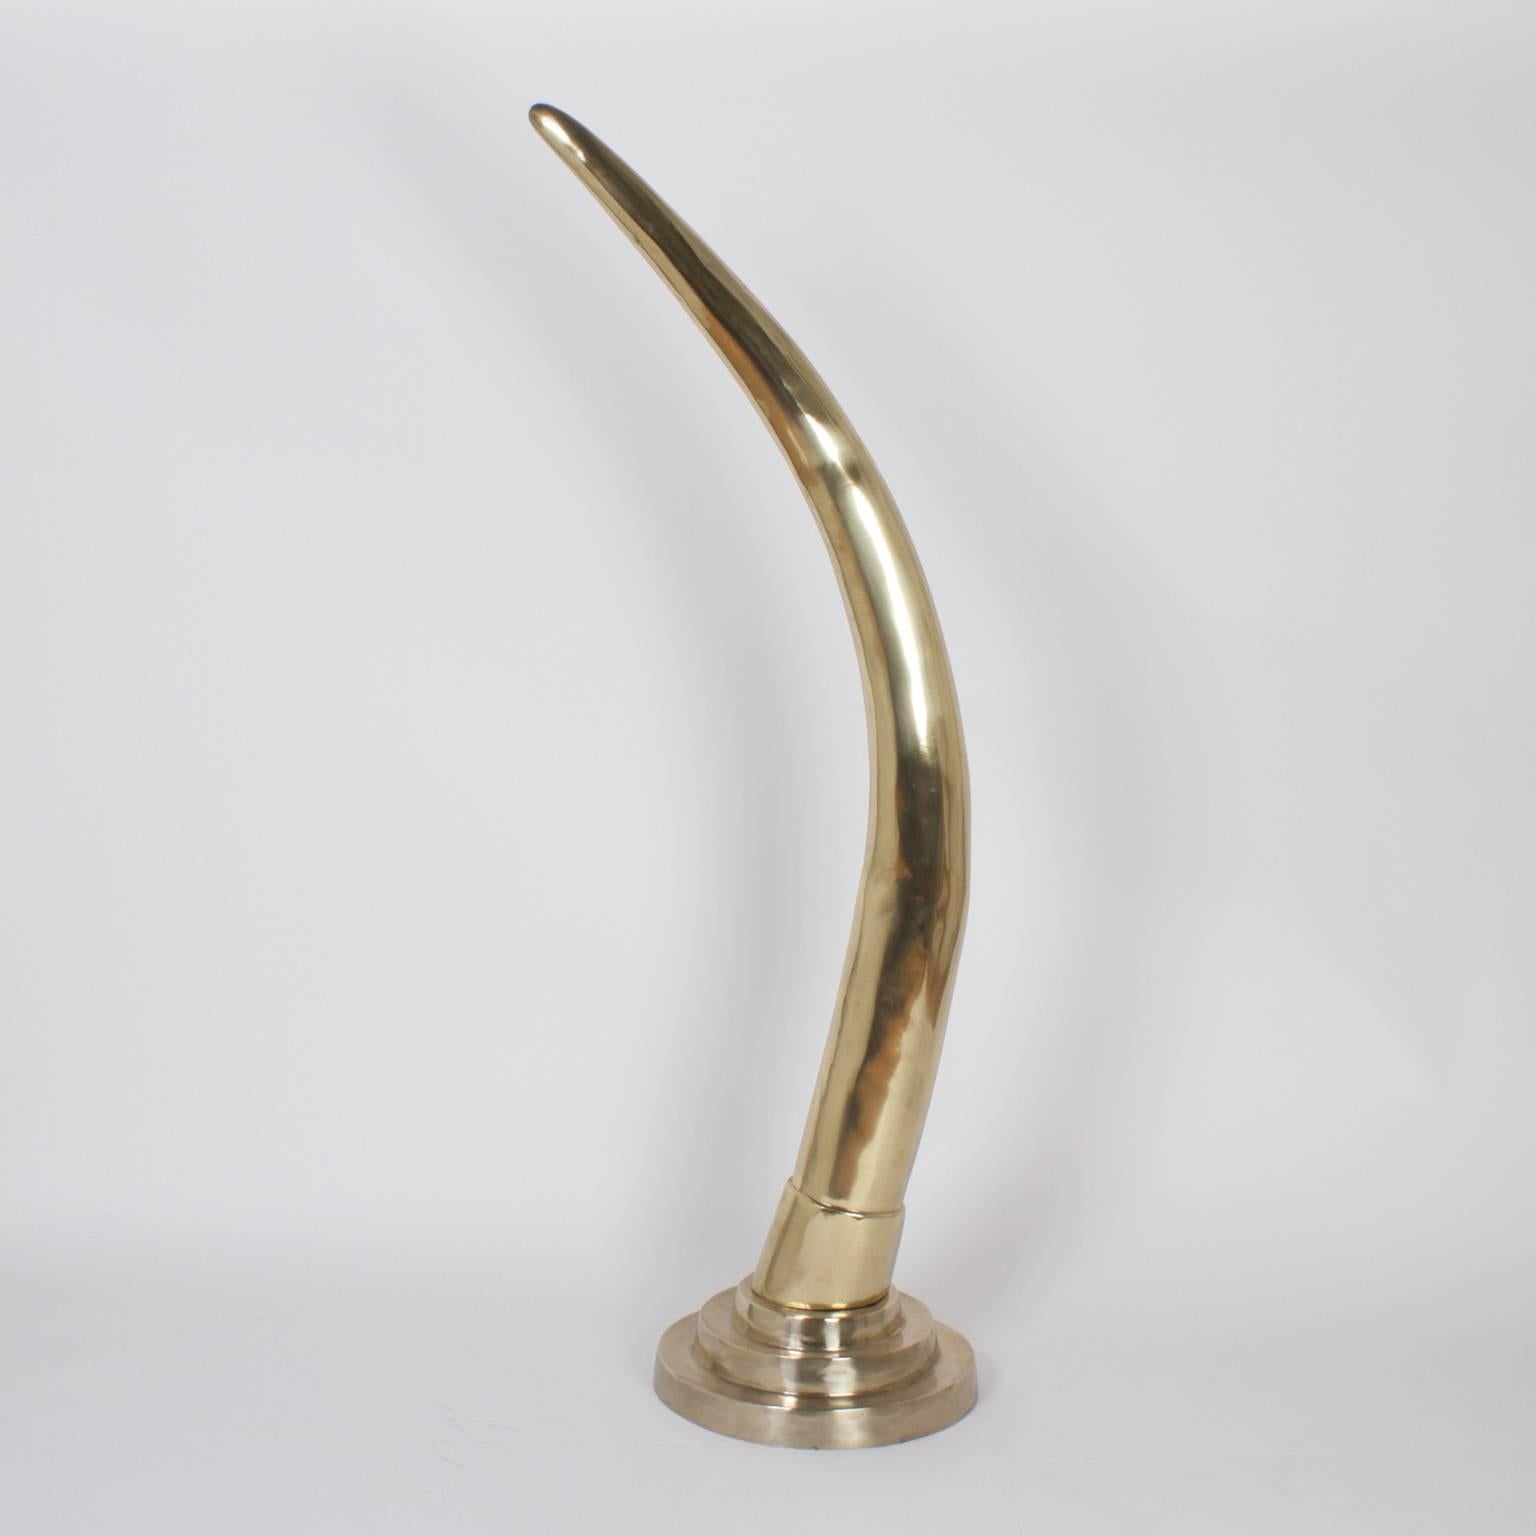 Bold pair of midcentury cast brass elephant tusks with plenty of decorative punch. These impressive objects have a strong presence that will enhance any style interior. Hand polished and lacquered for easy care.

 